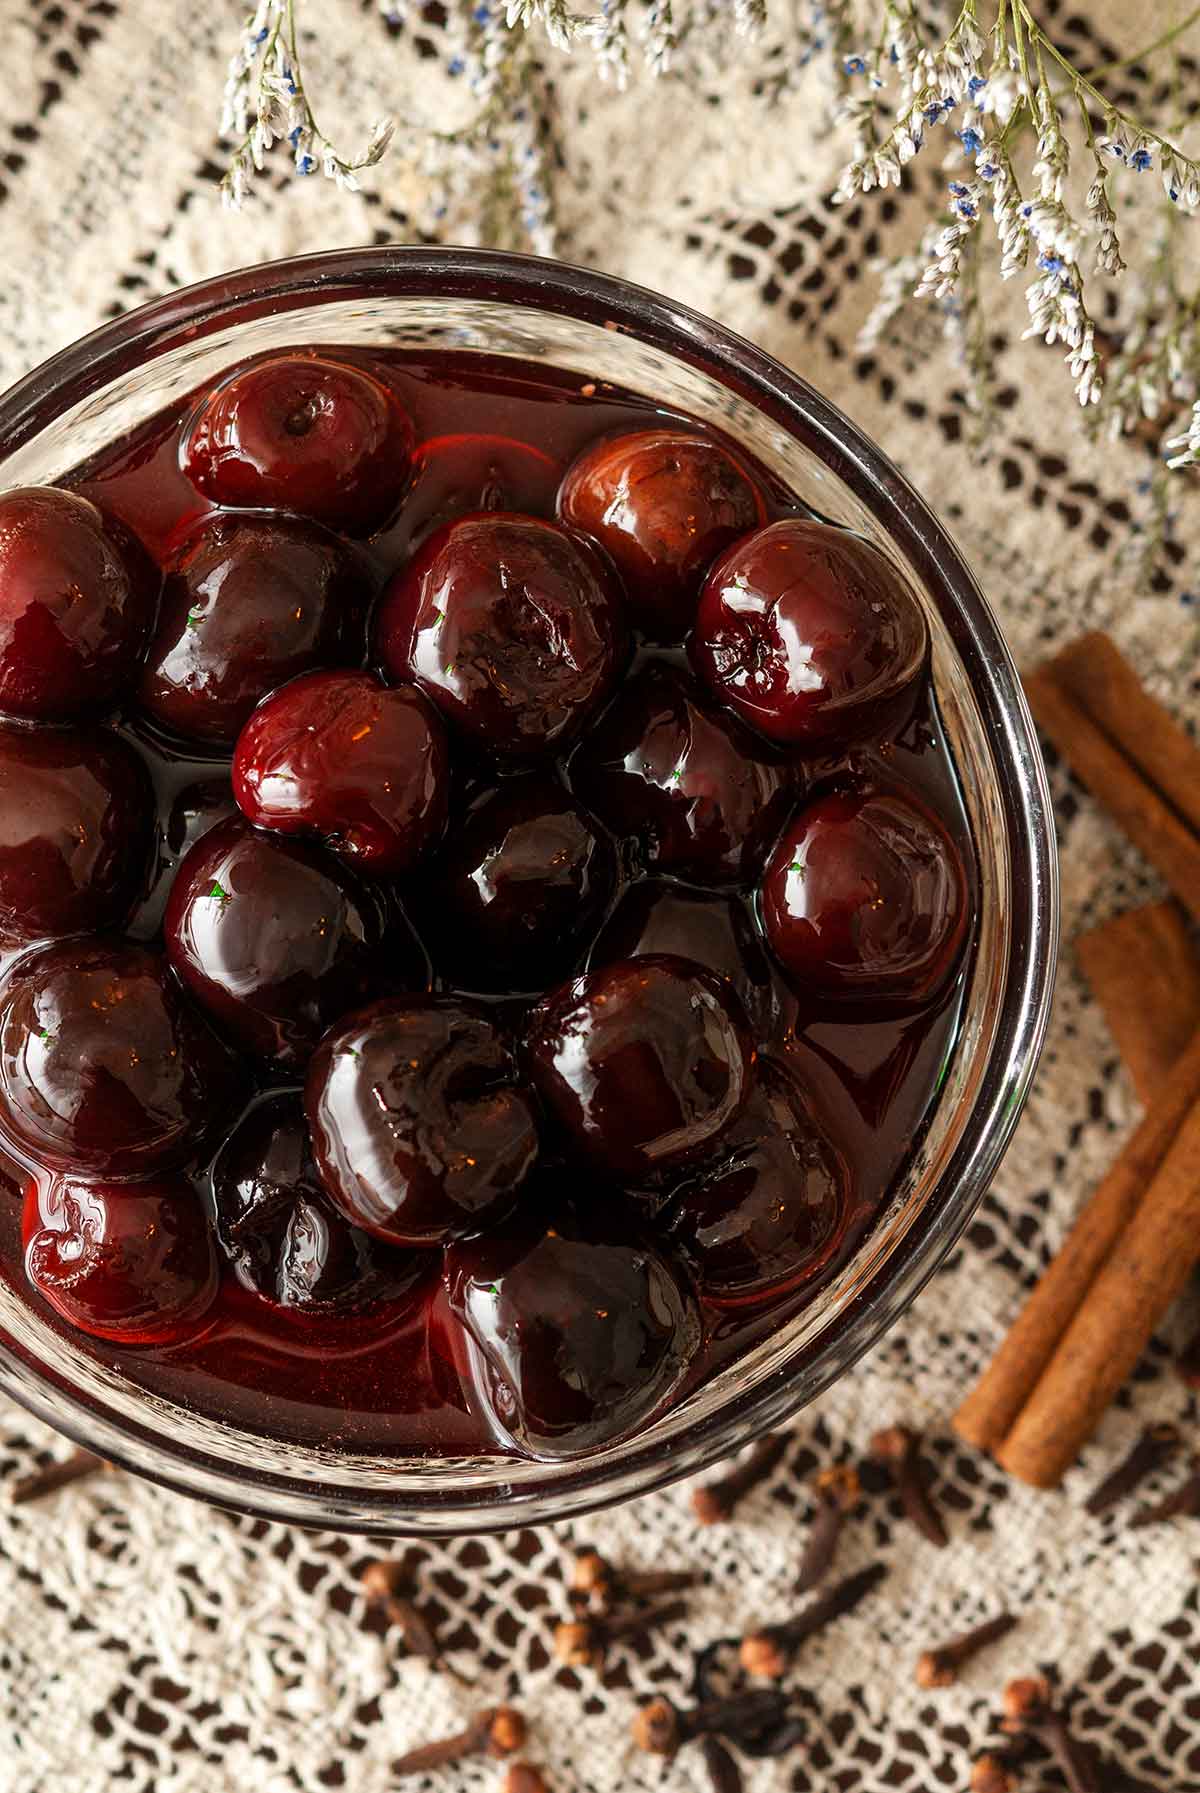 A bowl of maraschino cherries in syrup on a lace table cloth beside 3 cinnamon sticks and a few scattered cloves.